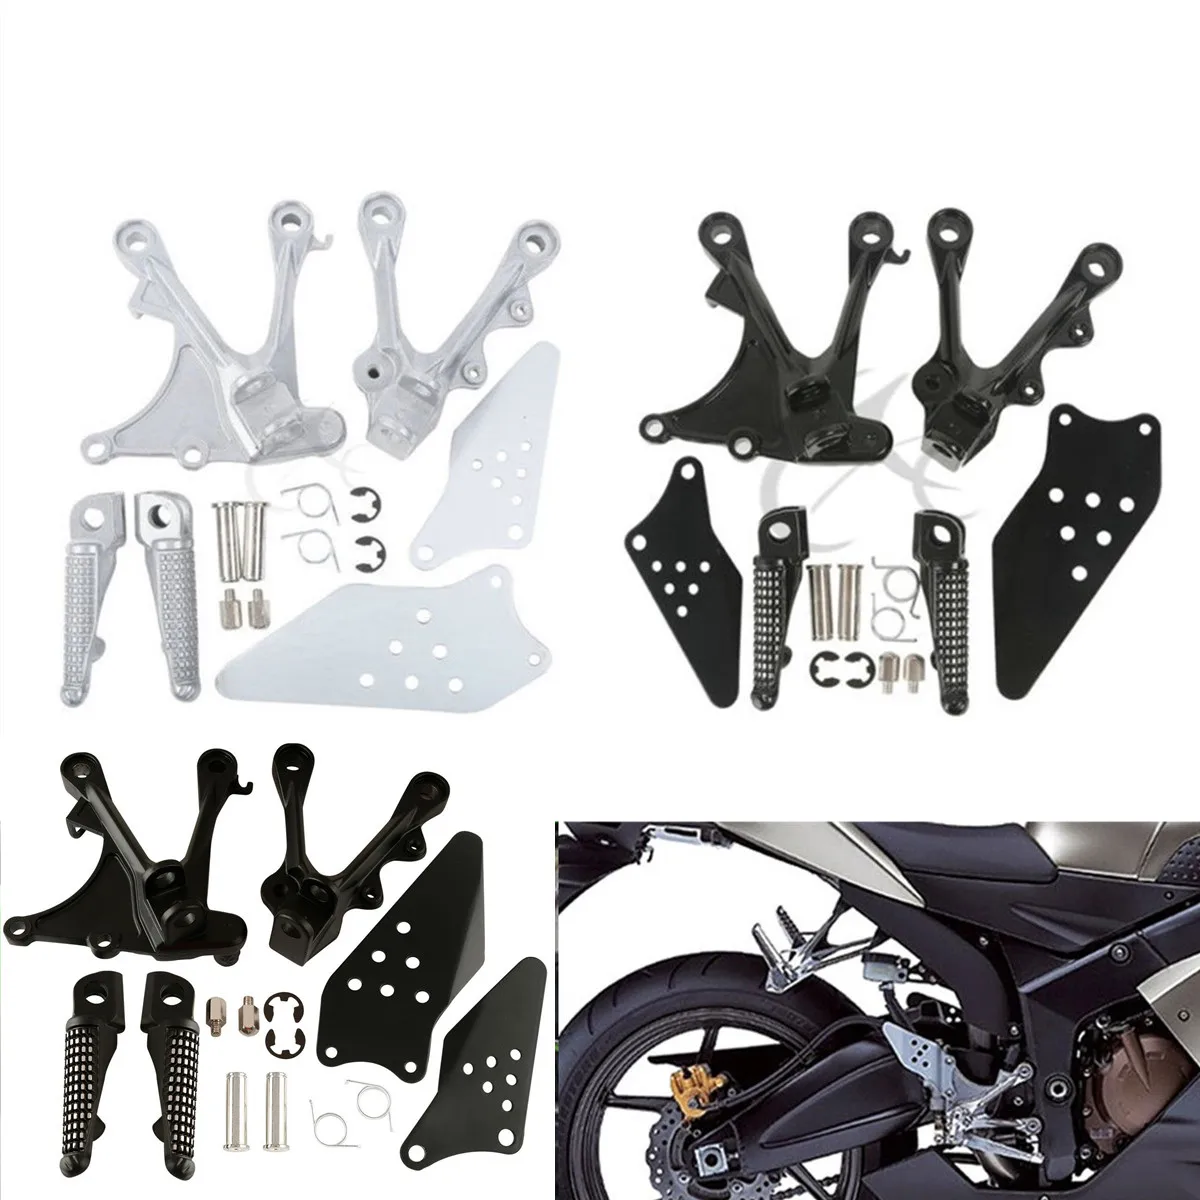 Front Footrest and Footpegs For Kawasaki Ninja ZX6R 2005-2008 ZX636 2005-2006